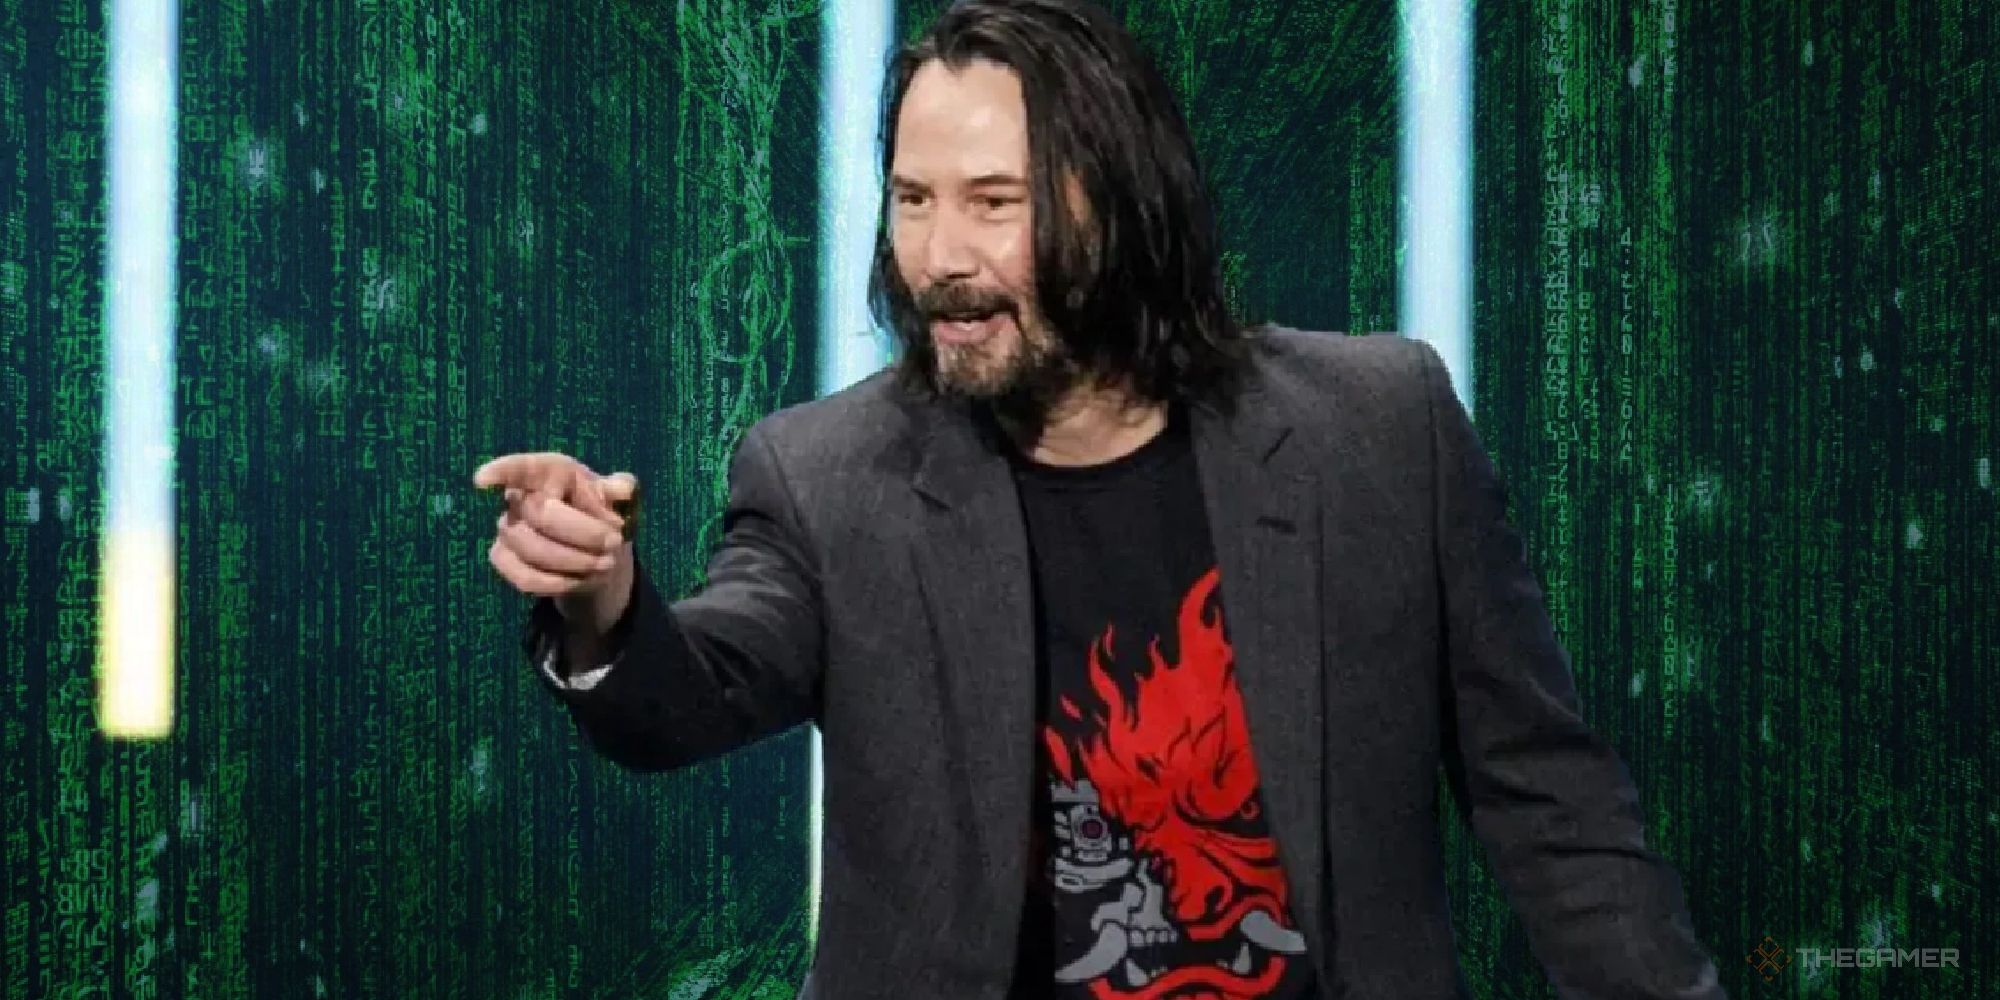 Keanu reeves at the 2020 game awards telling a fan they're breathtaking with a matrix code background behind them